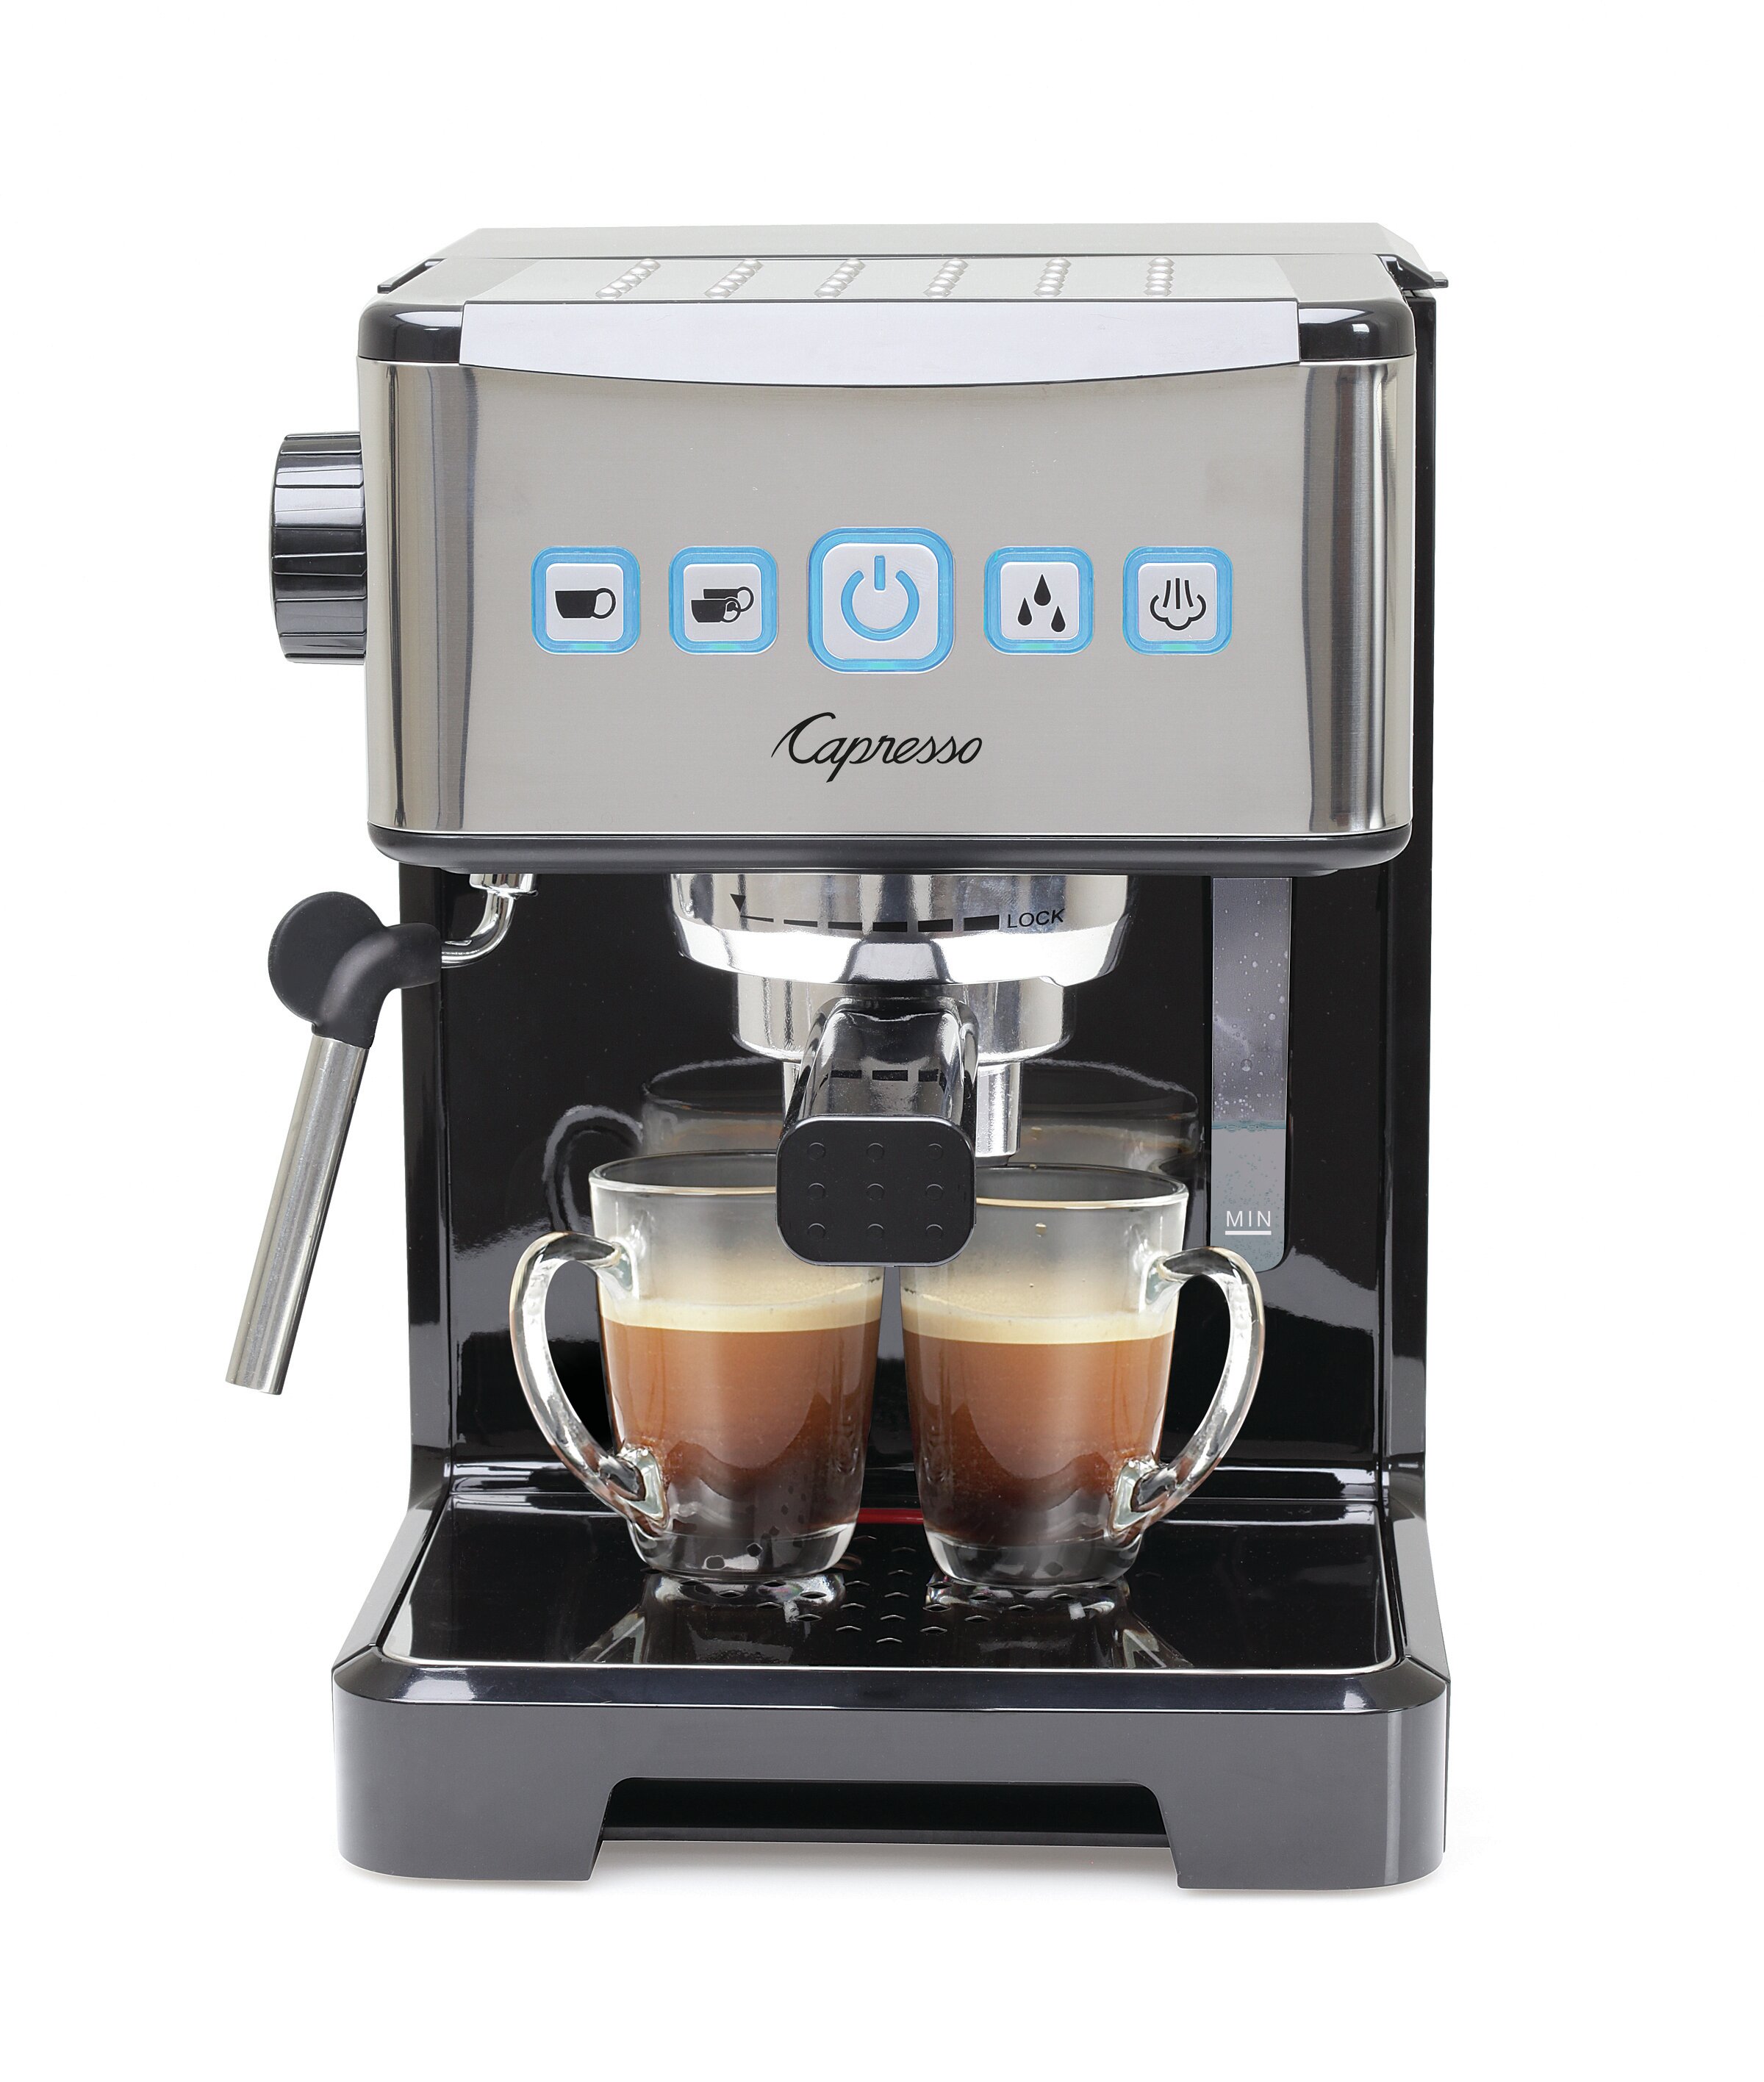  Mr. Coffee Espresso and Cappuccino Machine, Programmable Coffee  Maker with Automatic Milk Frother and 15-Bar Pump, Stainless Steel,Silver:  Semi Automatic Pump Espresso Machines: Home & Kitchen